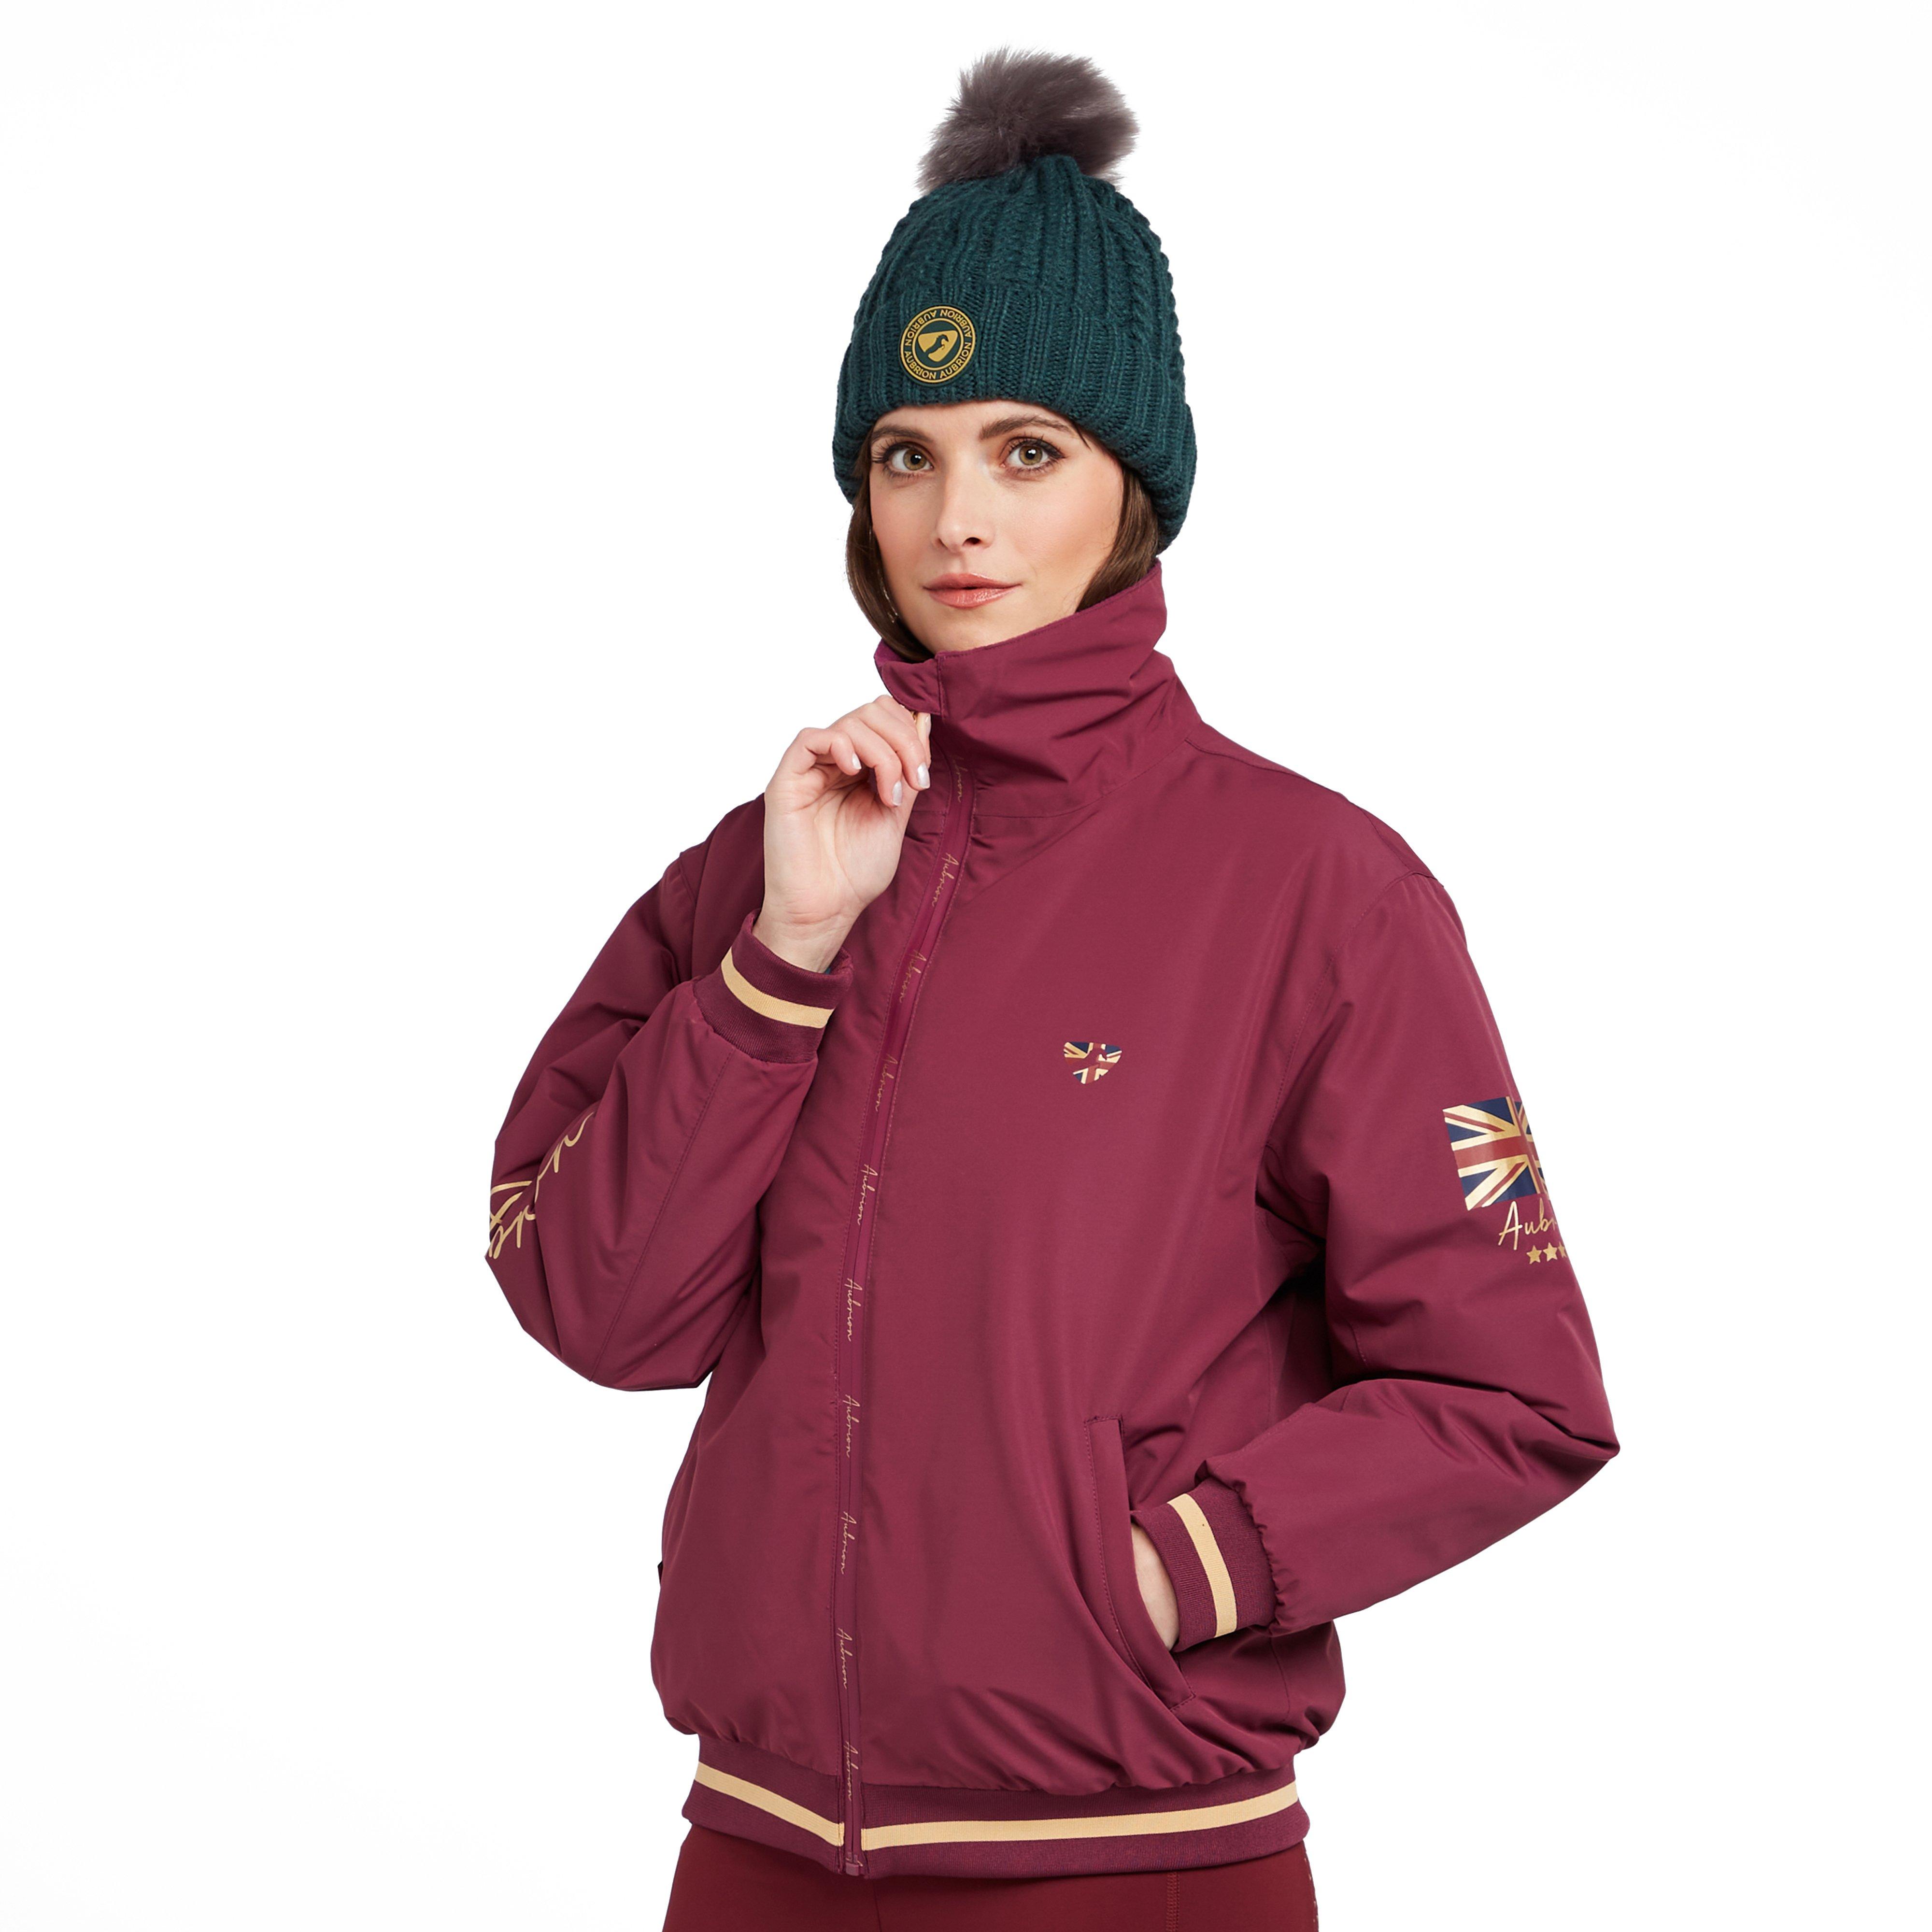 Womens Team Jacket Mulberry